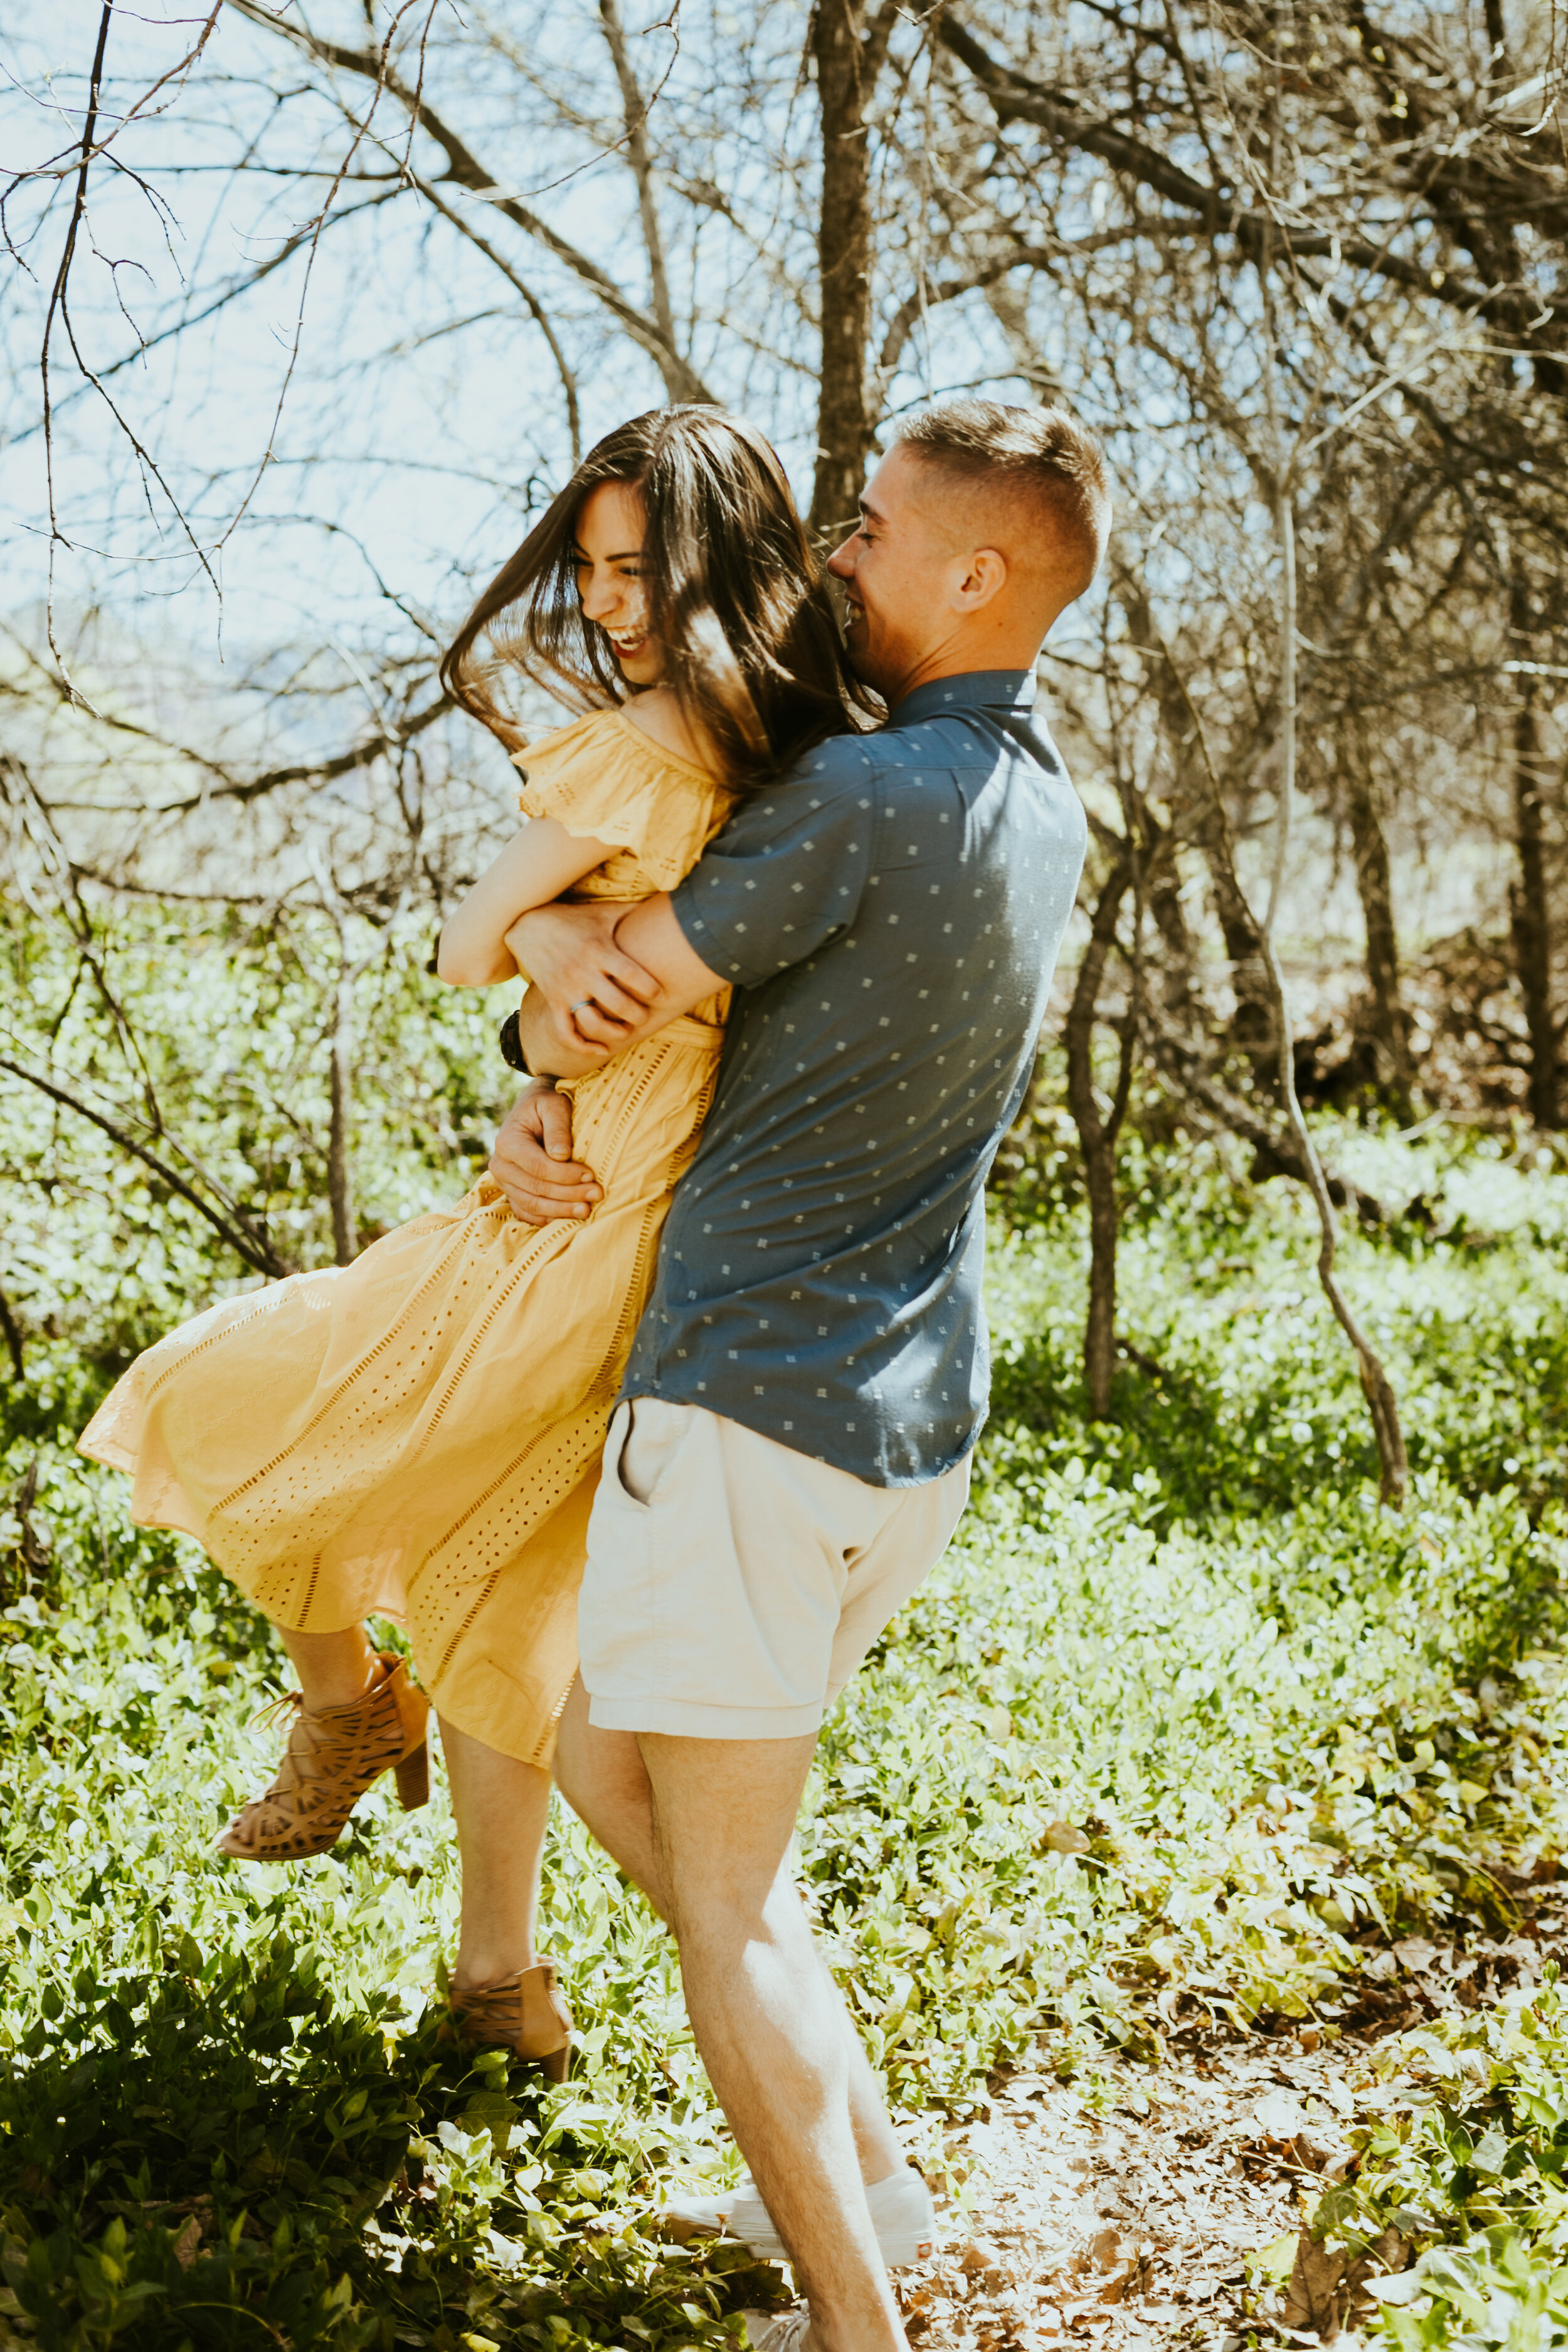 red rock crossing sedona arizona cathedral rock crescent moon ranch couple photos engagement photo outfit inspiration couple posing ideas midday photos anniversary photos-10.jpg